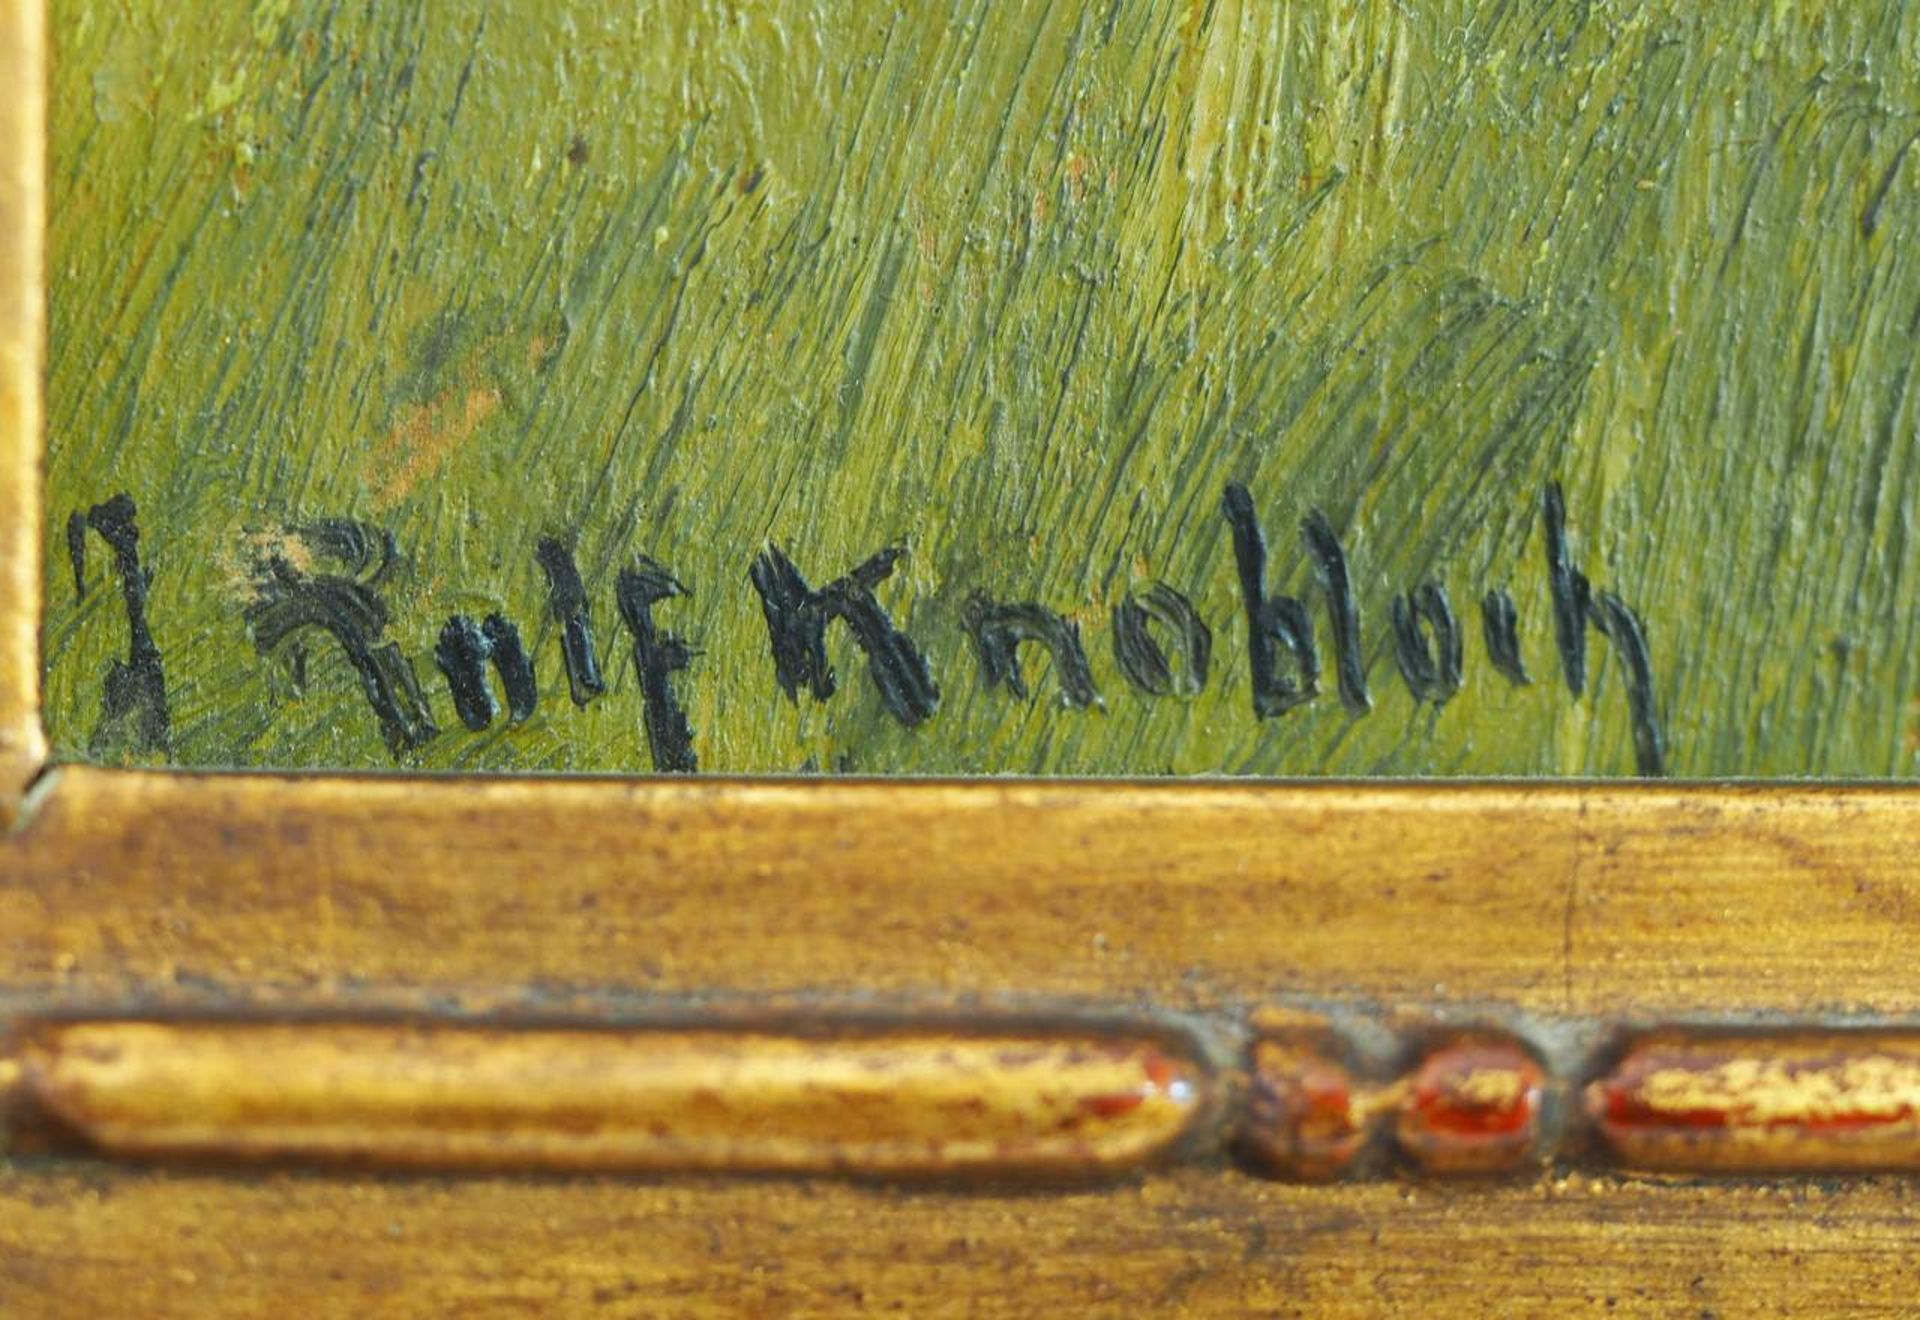 KNOBLOCH, Rolf. - Image 5 of 7